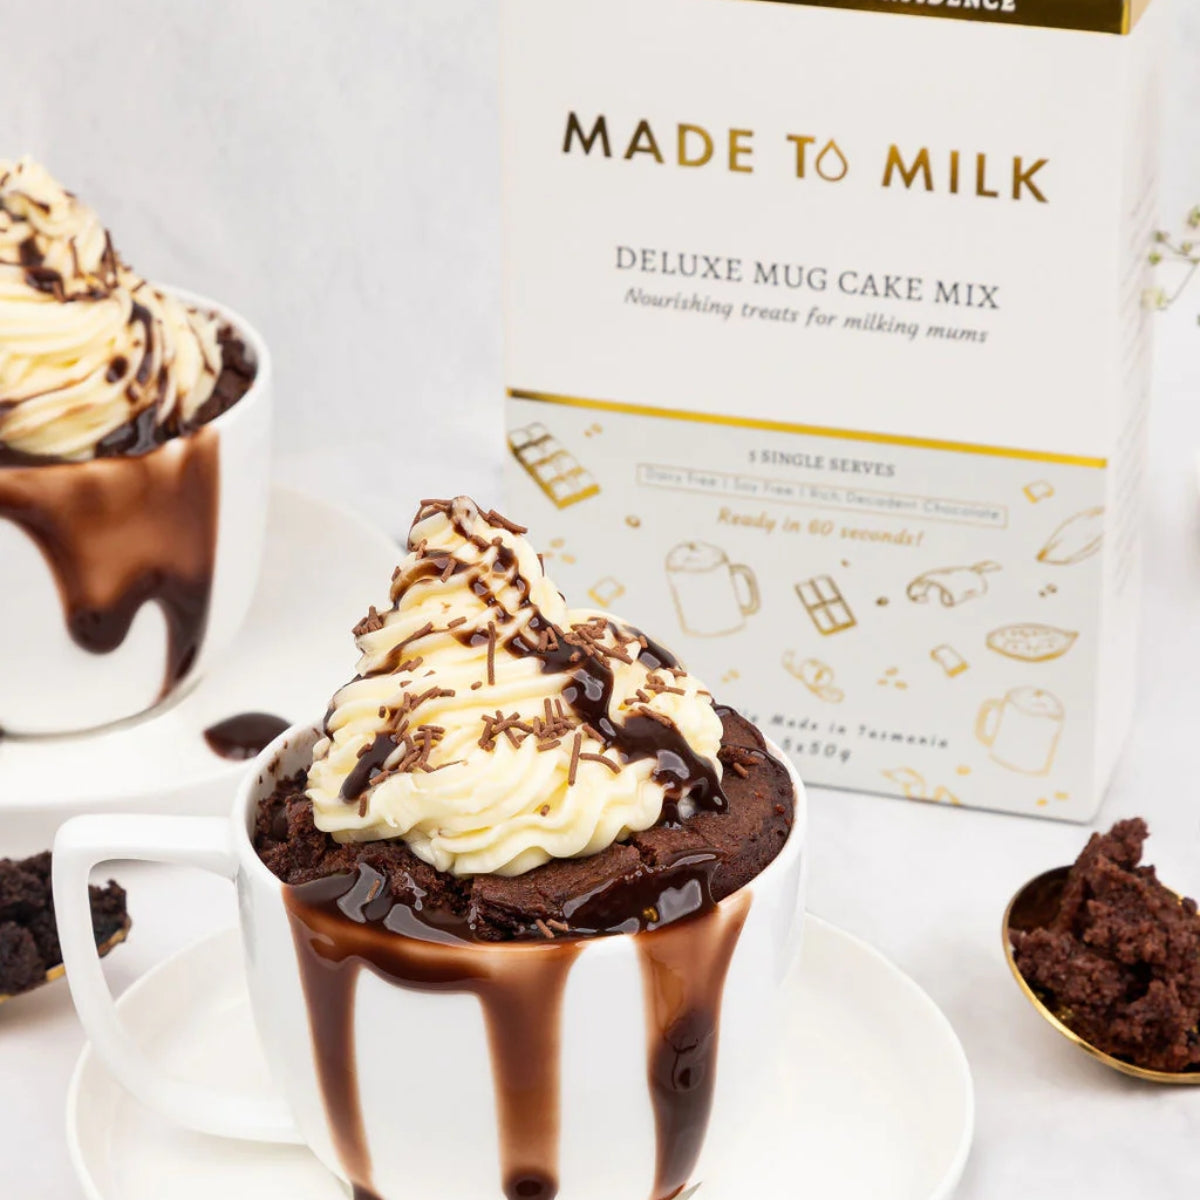 Made to Milk - Deluxe Mug Cake Mix - 5 pack